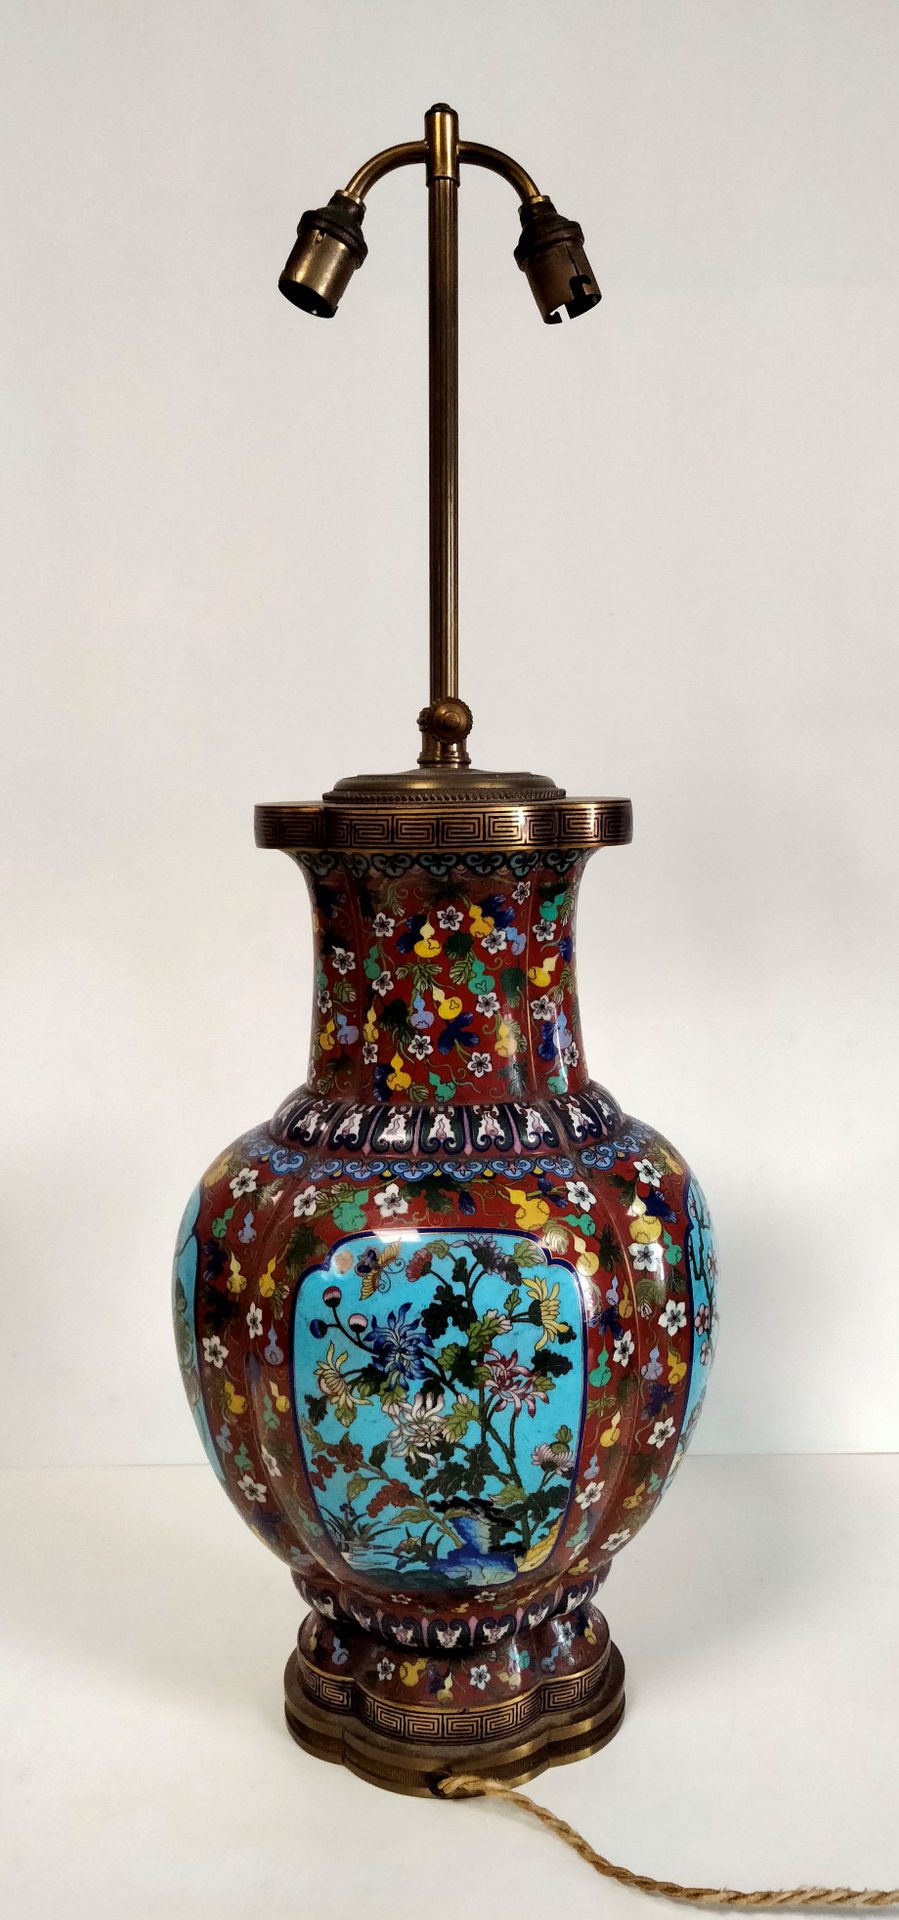 Null Cloisonné-Emaille-Vase, China, Ende 19. - Anfang 20. Jh.
Vierlappige Balust&hellip;